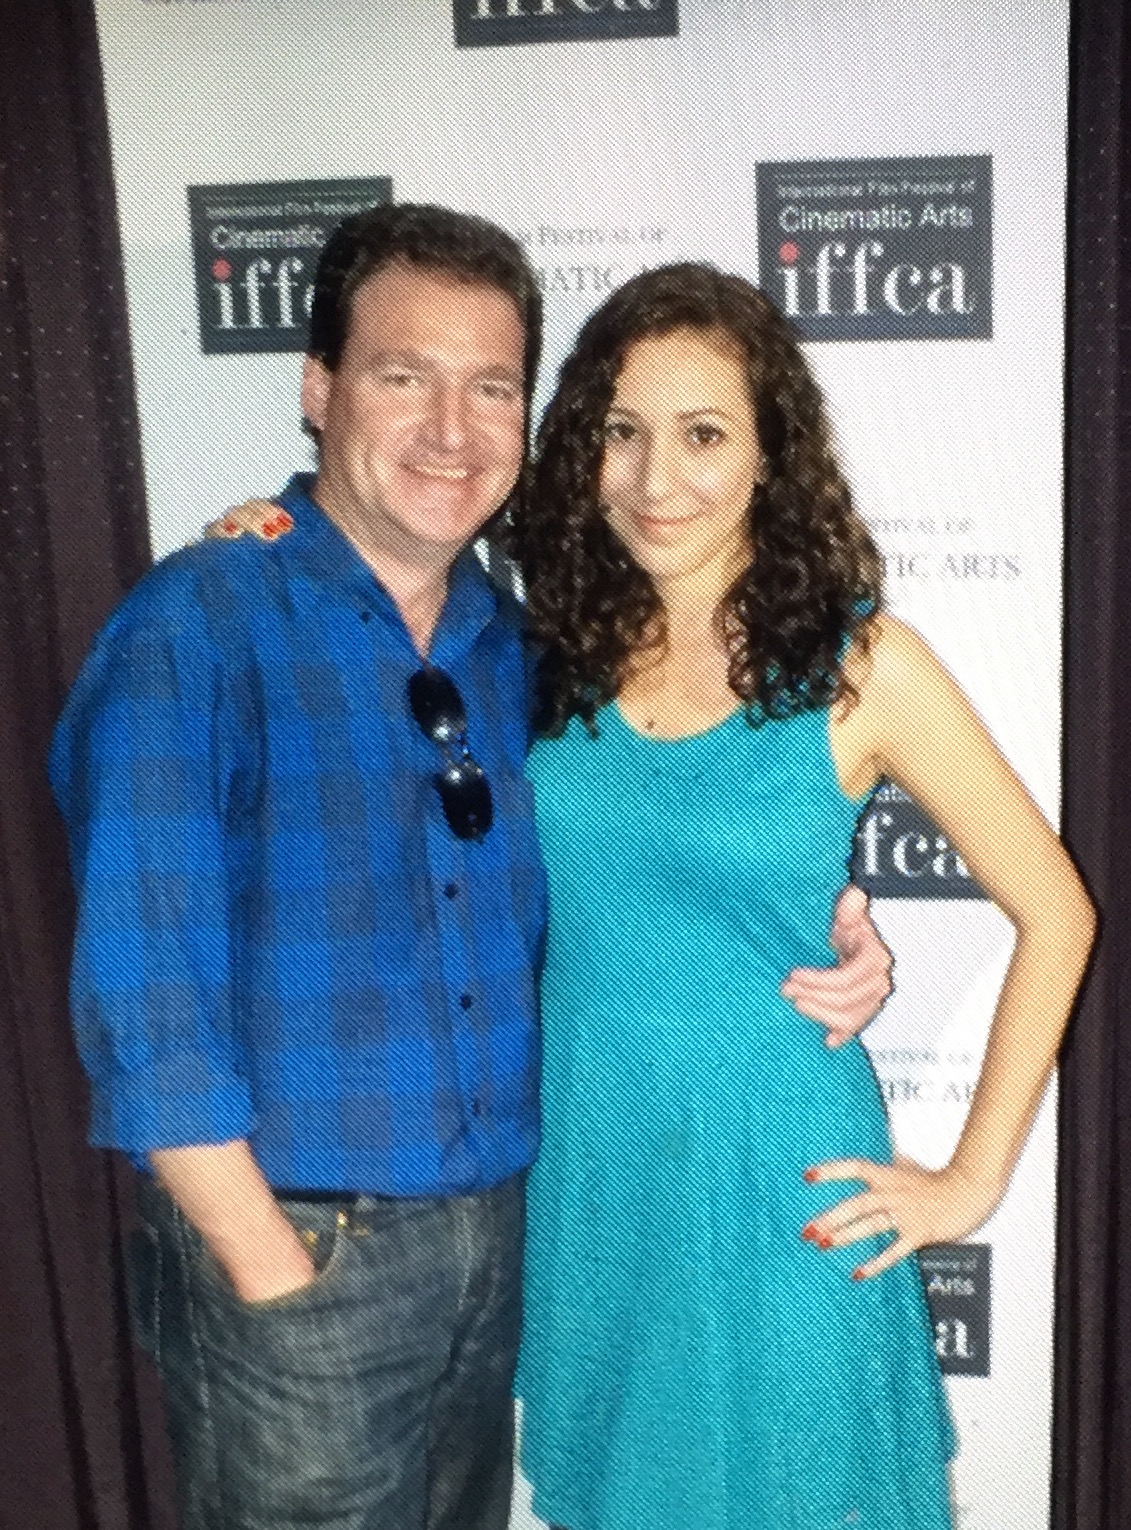 With Elisa Dyann at the IFFCA premiere of 